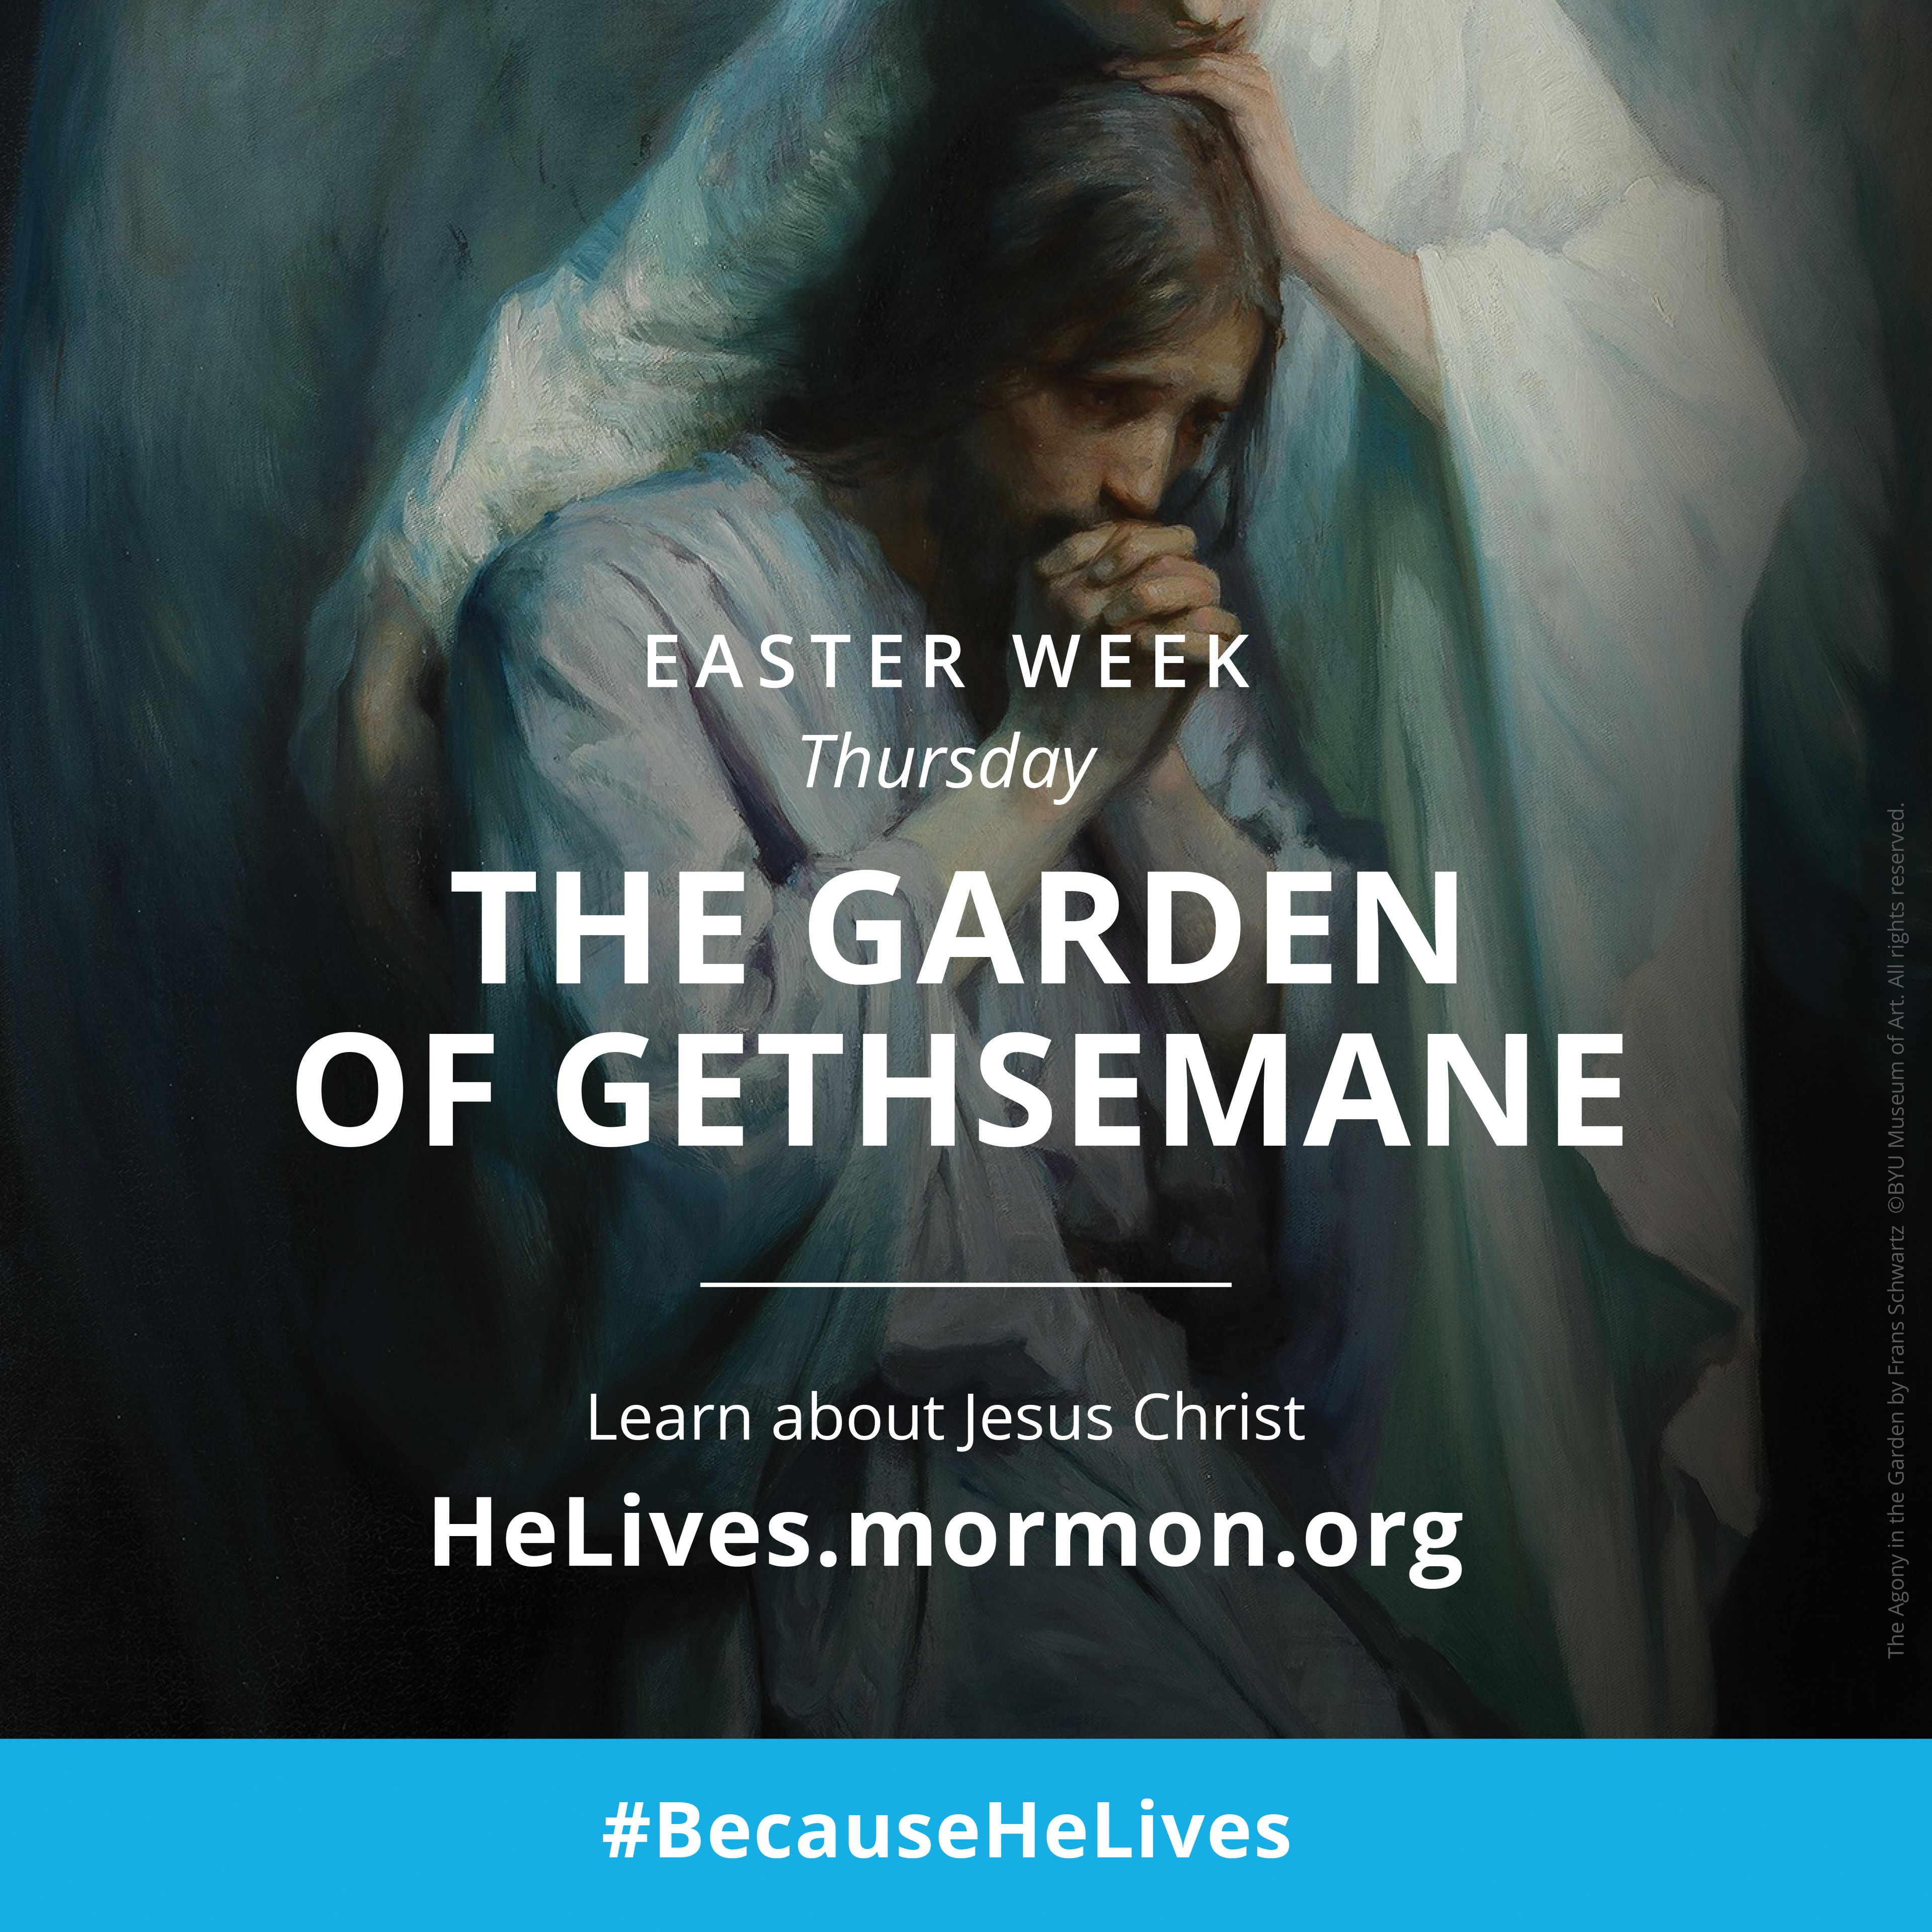 Easter week, Thursday: the Garden of Gethsemane. Learn about Jesus Christ. #BecauseHeLives, HeLives.mormon.org